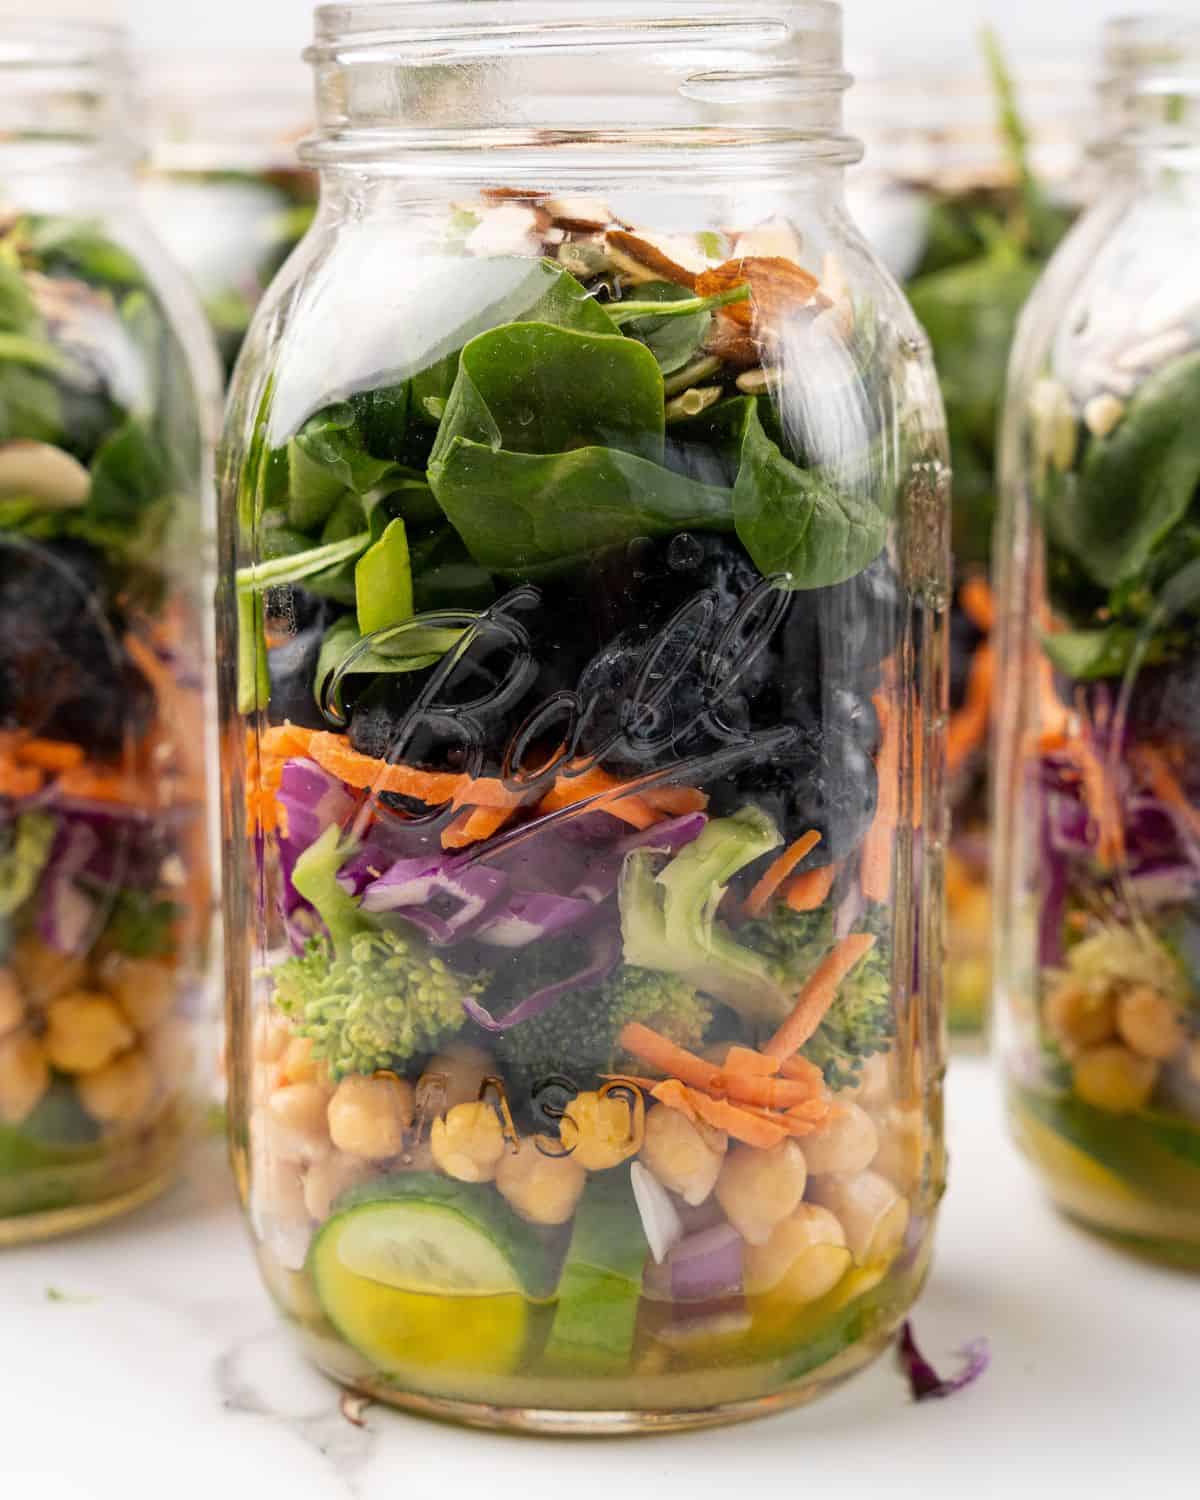 Salad in a Jar—Good for Health and Wealth • Everyday Cheapskate